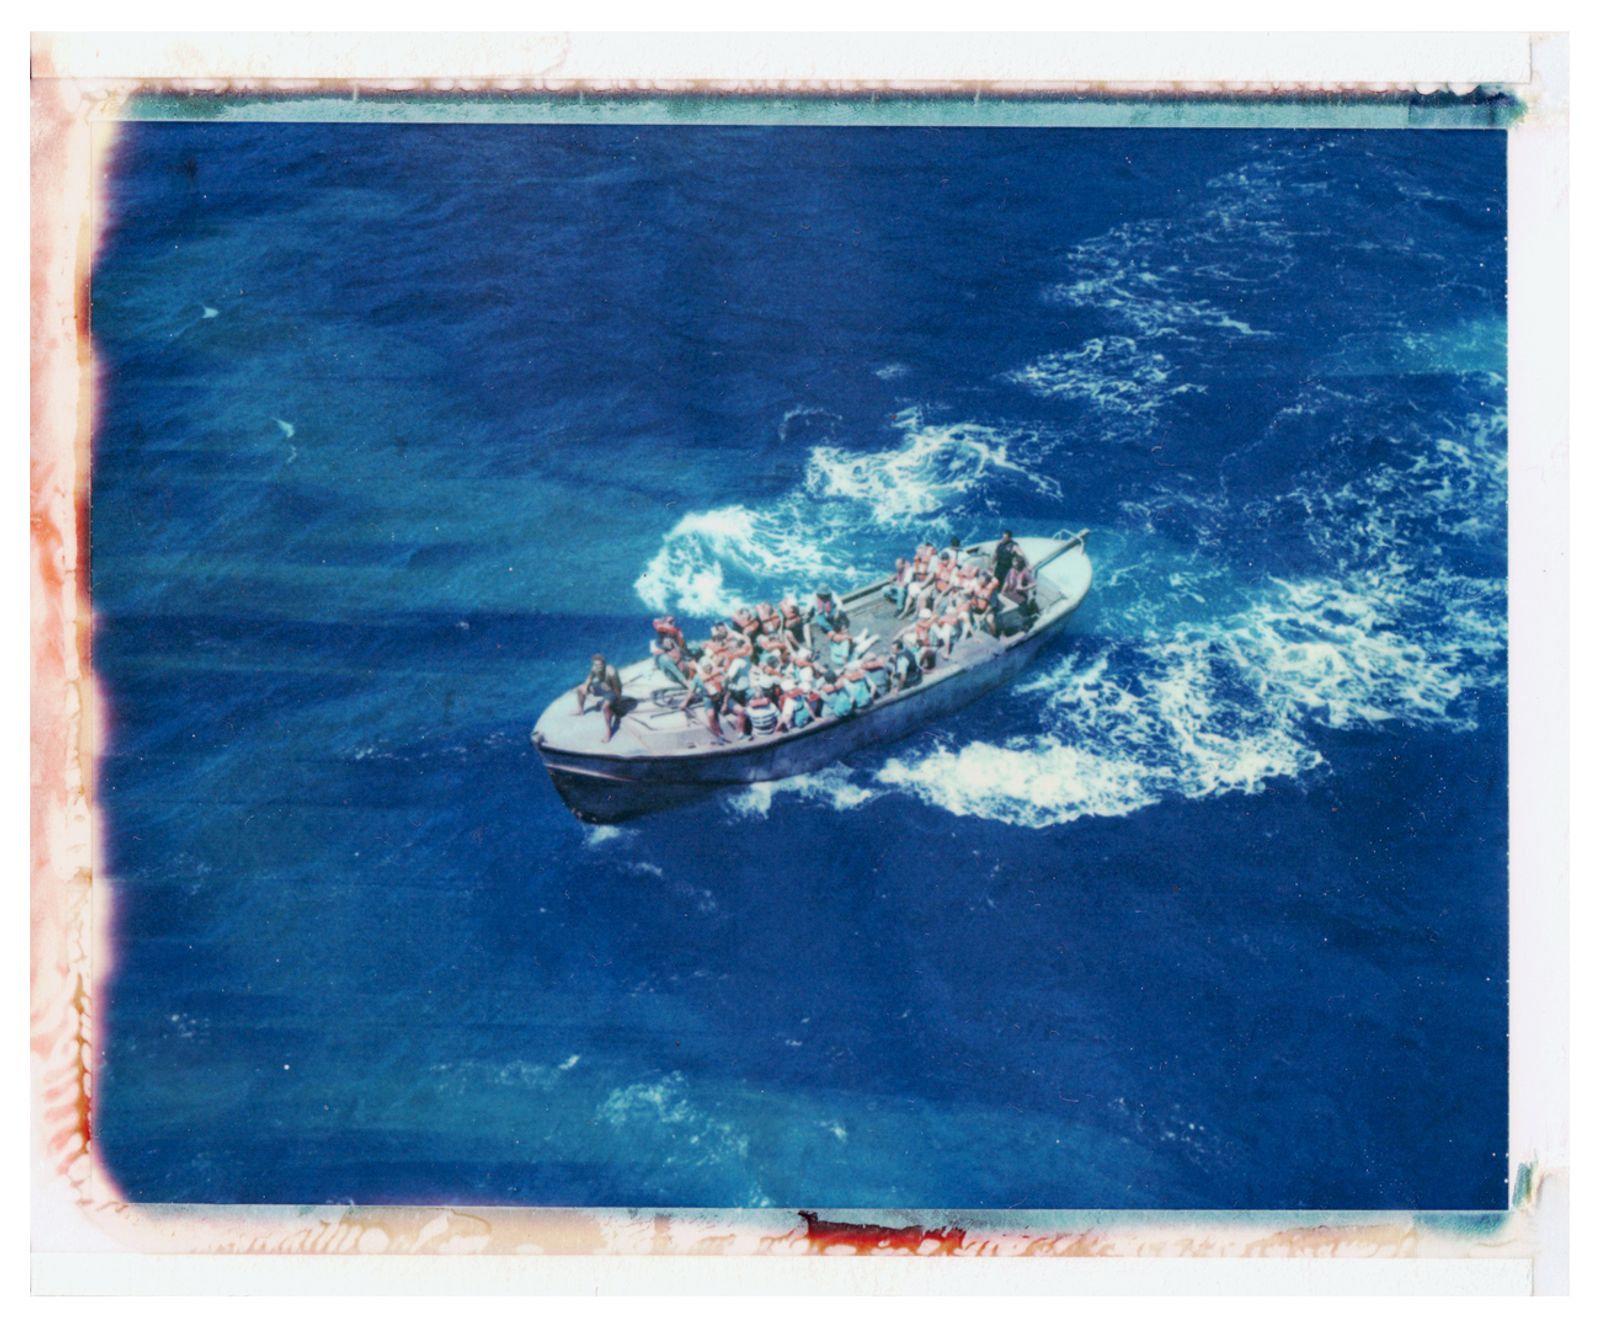 © Rhiannon Adam - Image from the Big Fence, a portrait of pitcairn island photography project